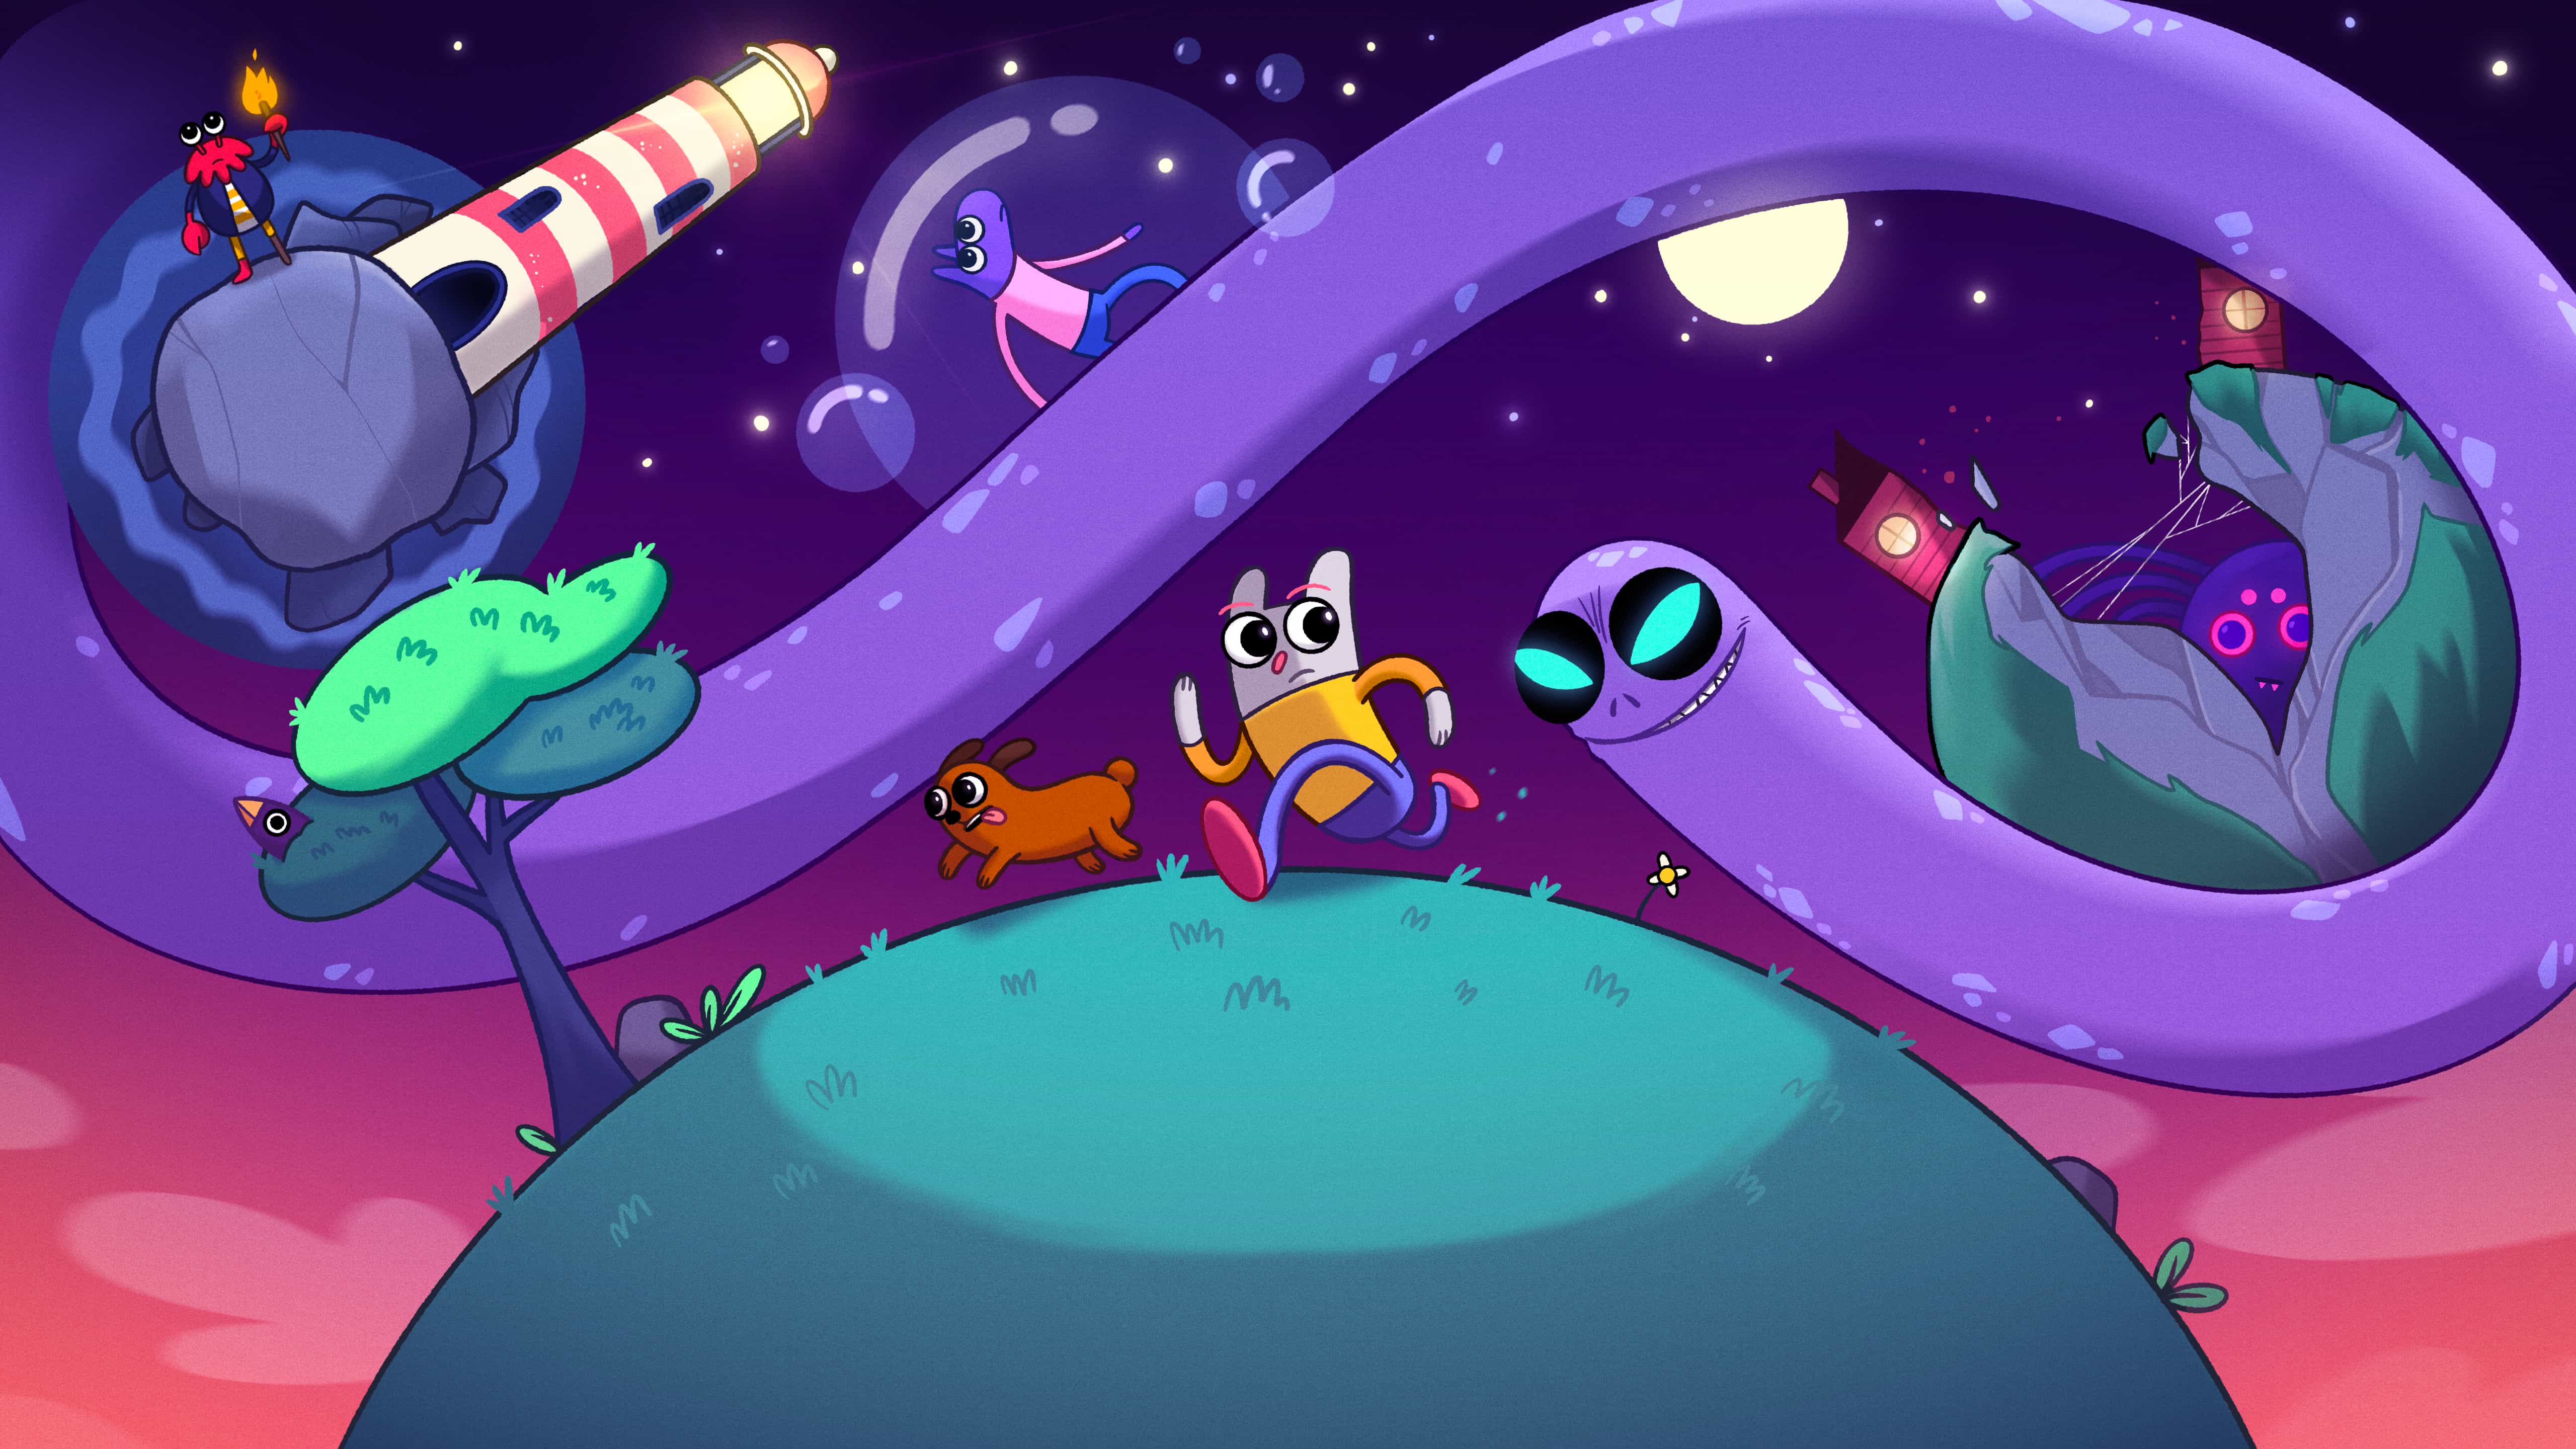 Apple Arcade adds finger-wiggling puzzle adventure “Winding Worlds”